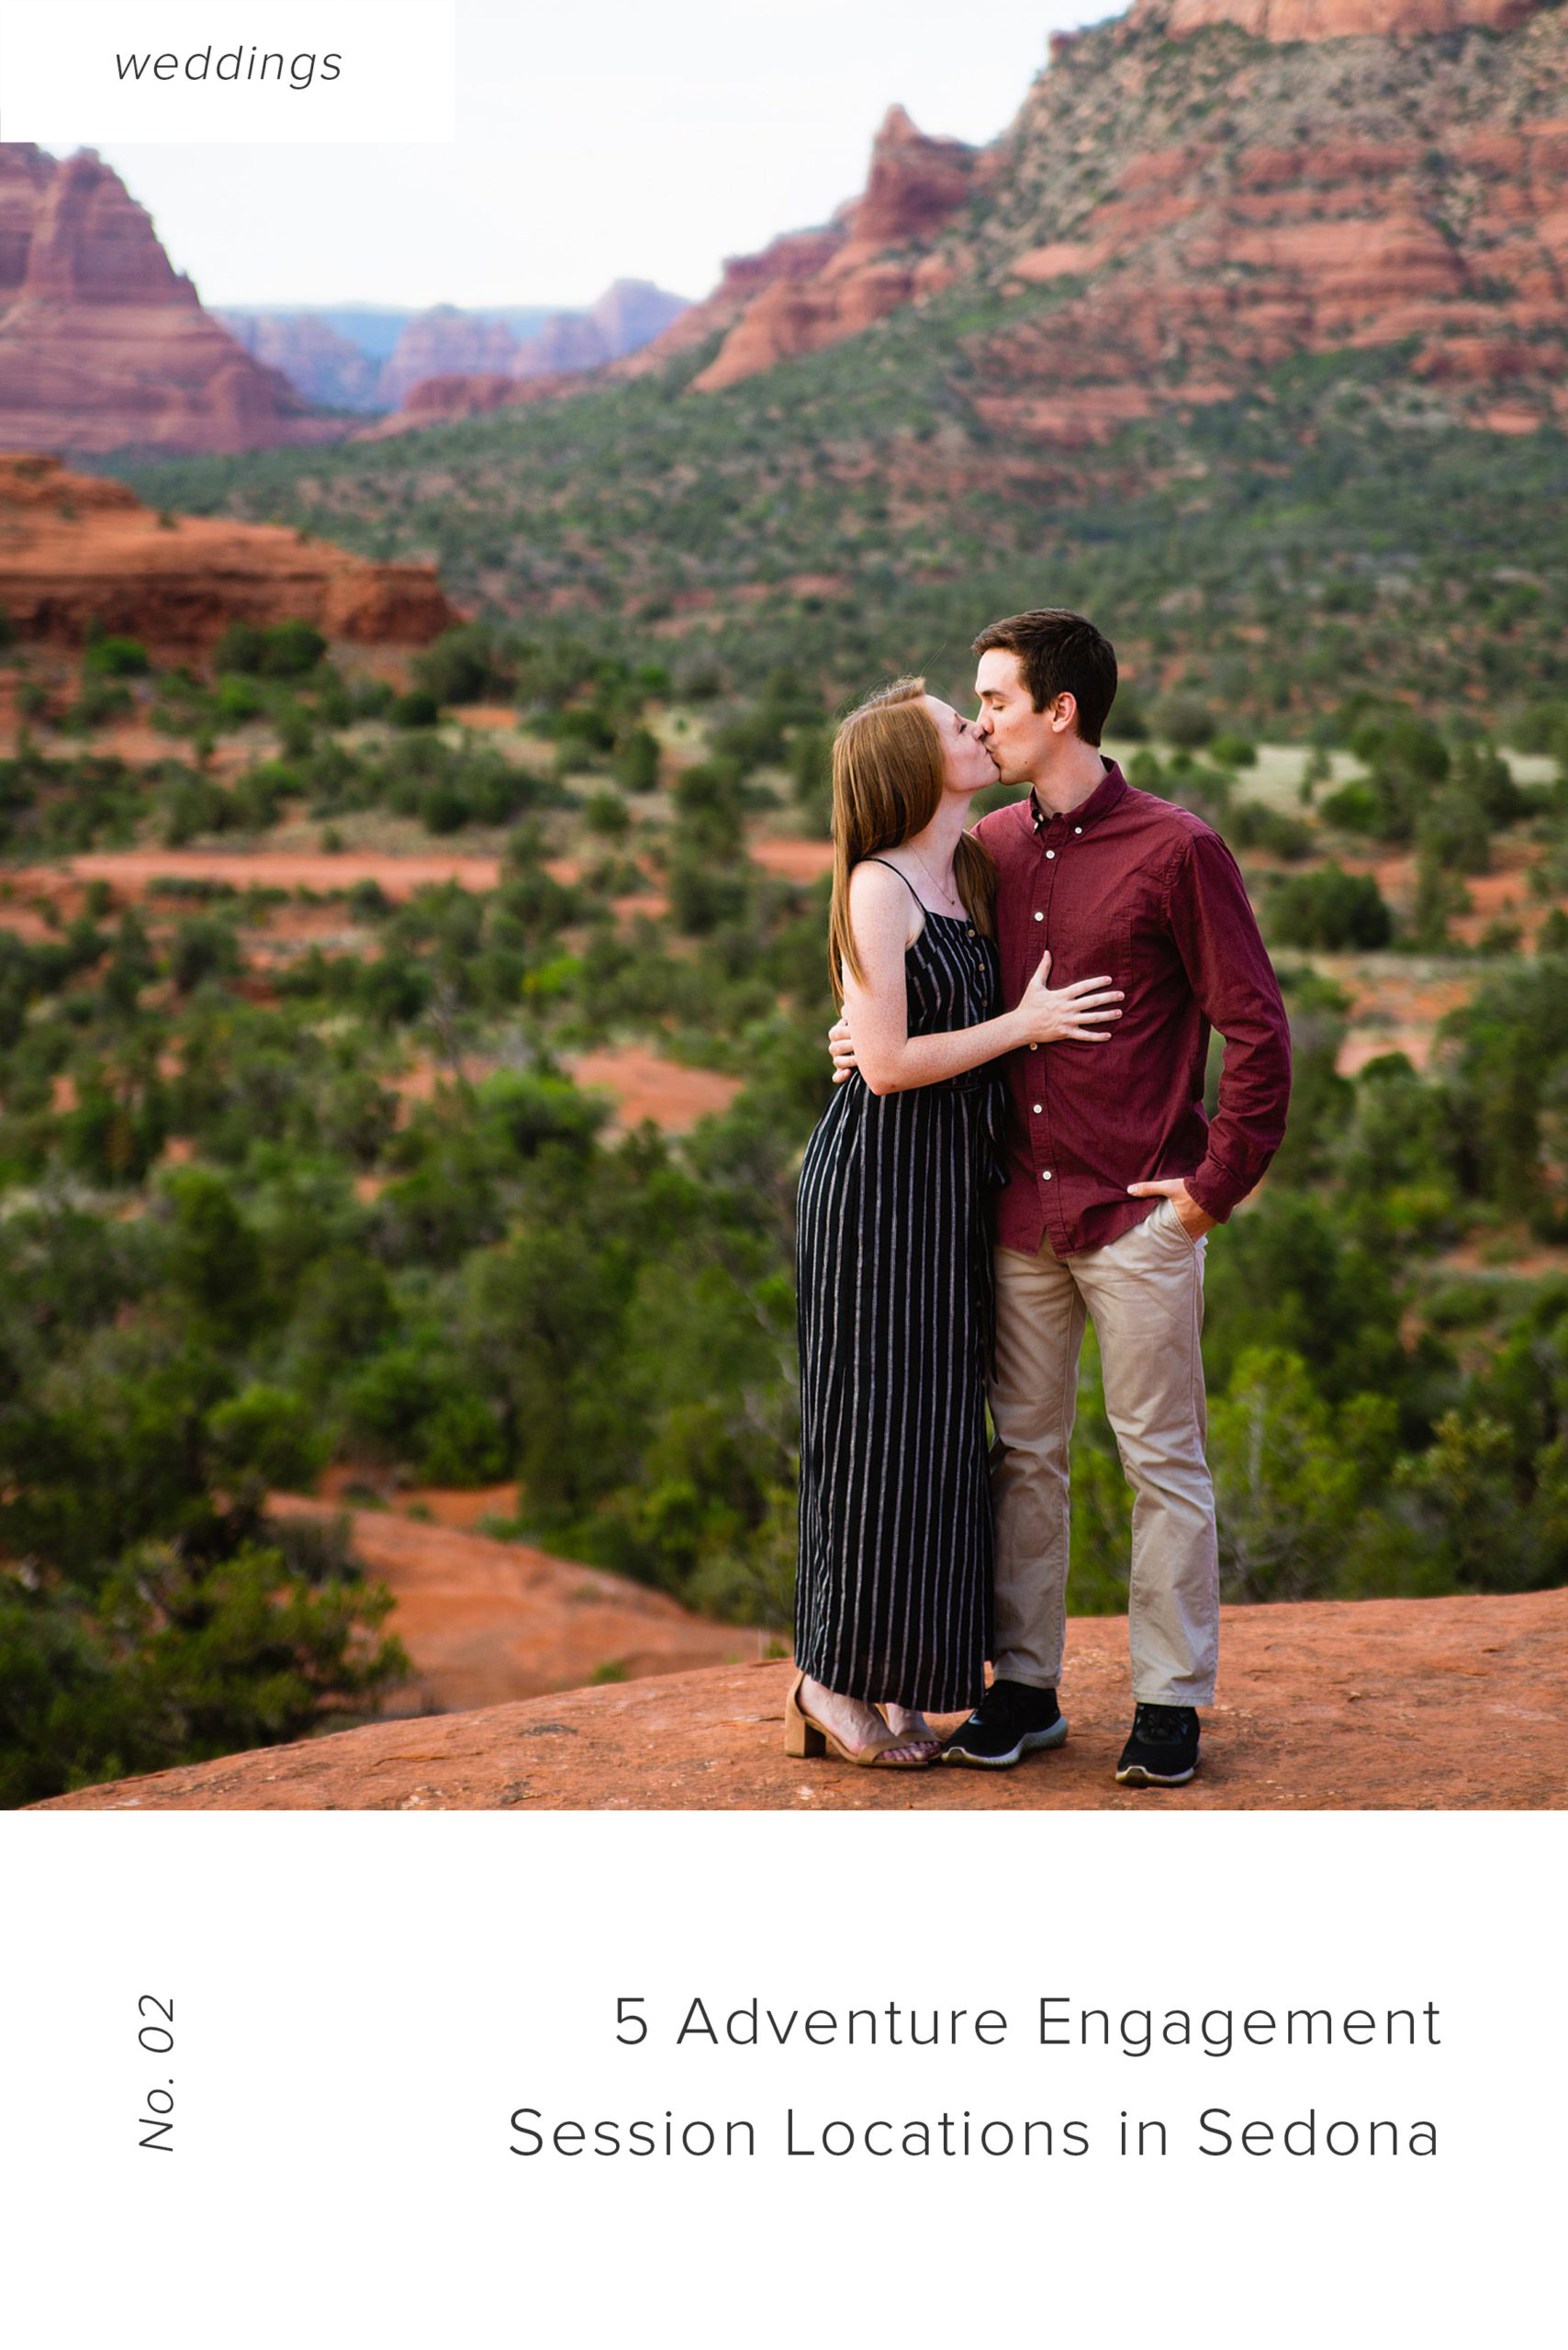 5 Adventure Engagement Session Locations in Sedona by PMA Photography